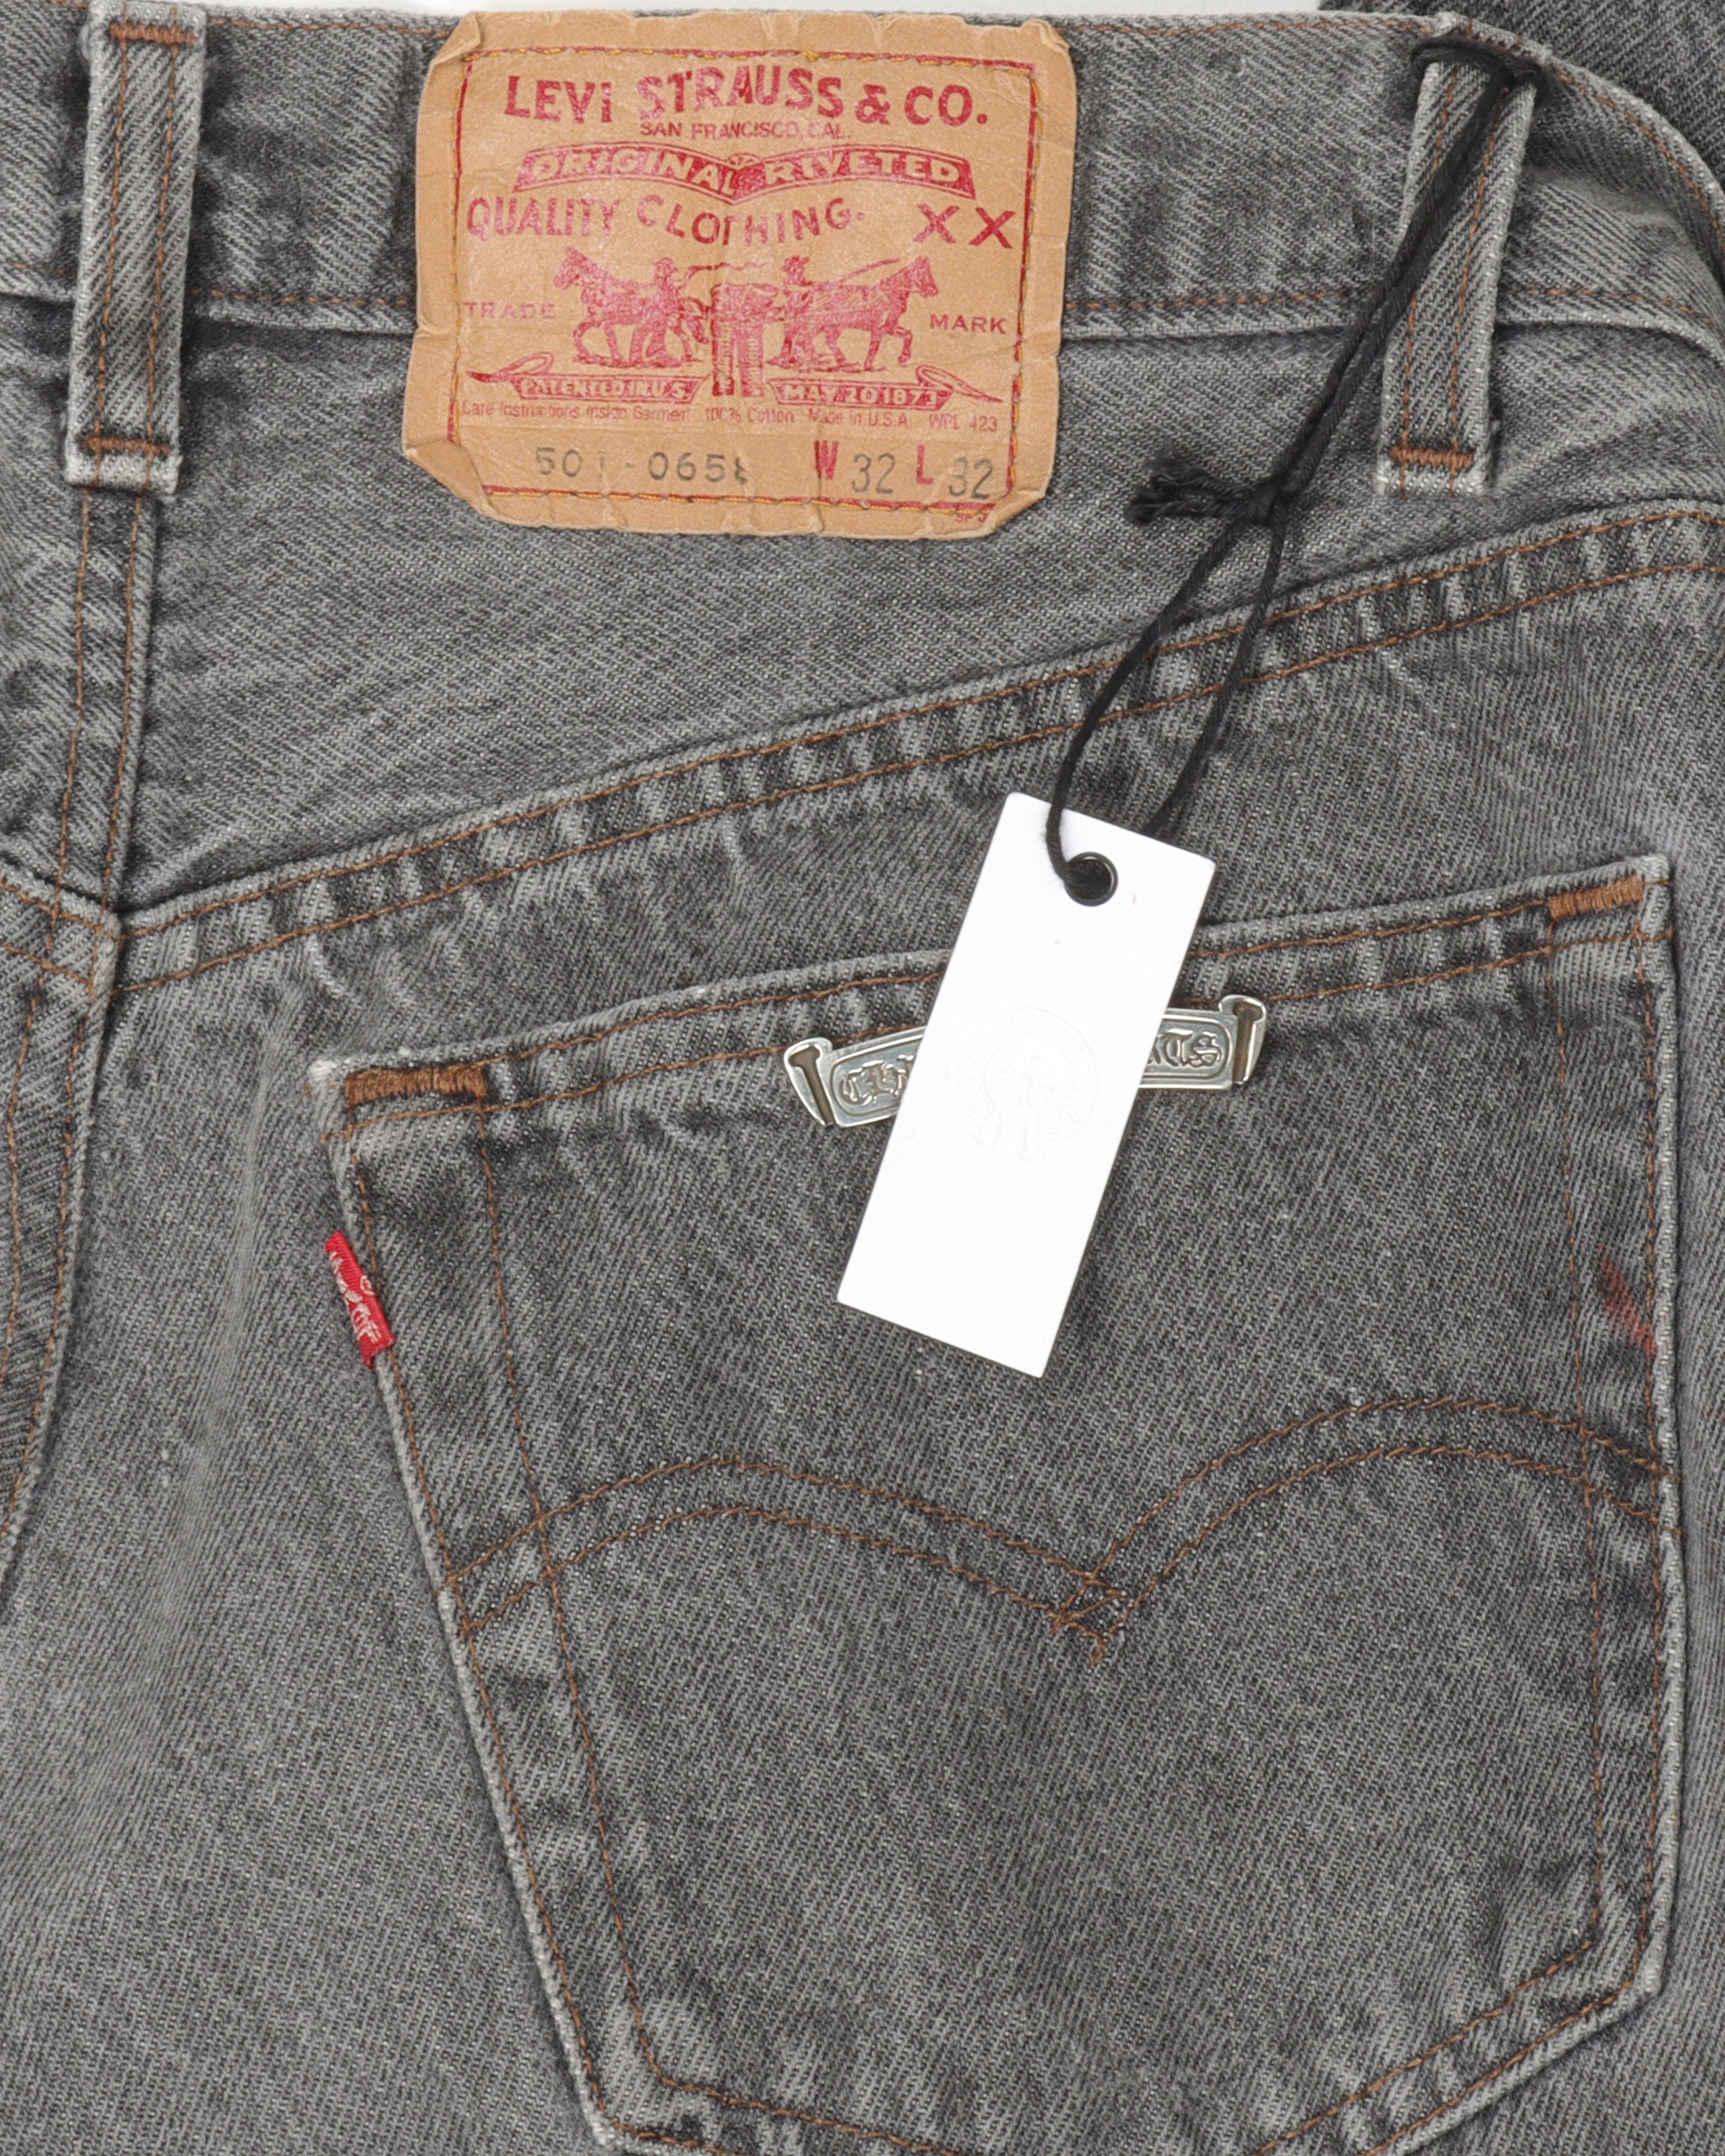 Levi's Leather Cross Patch Jeans